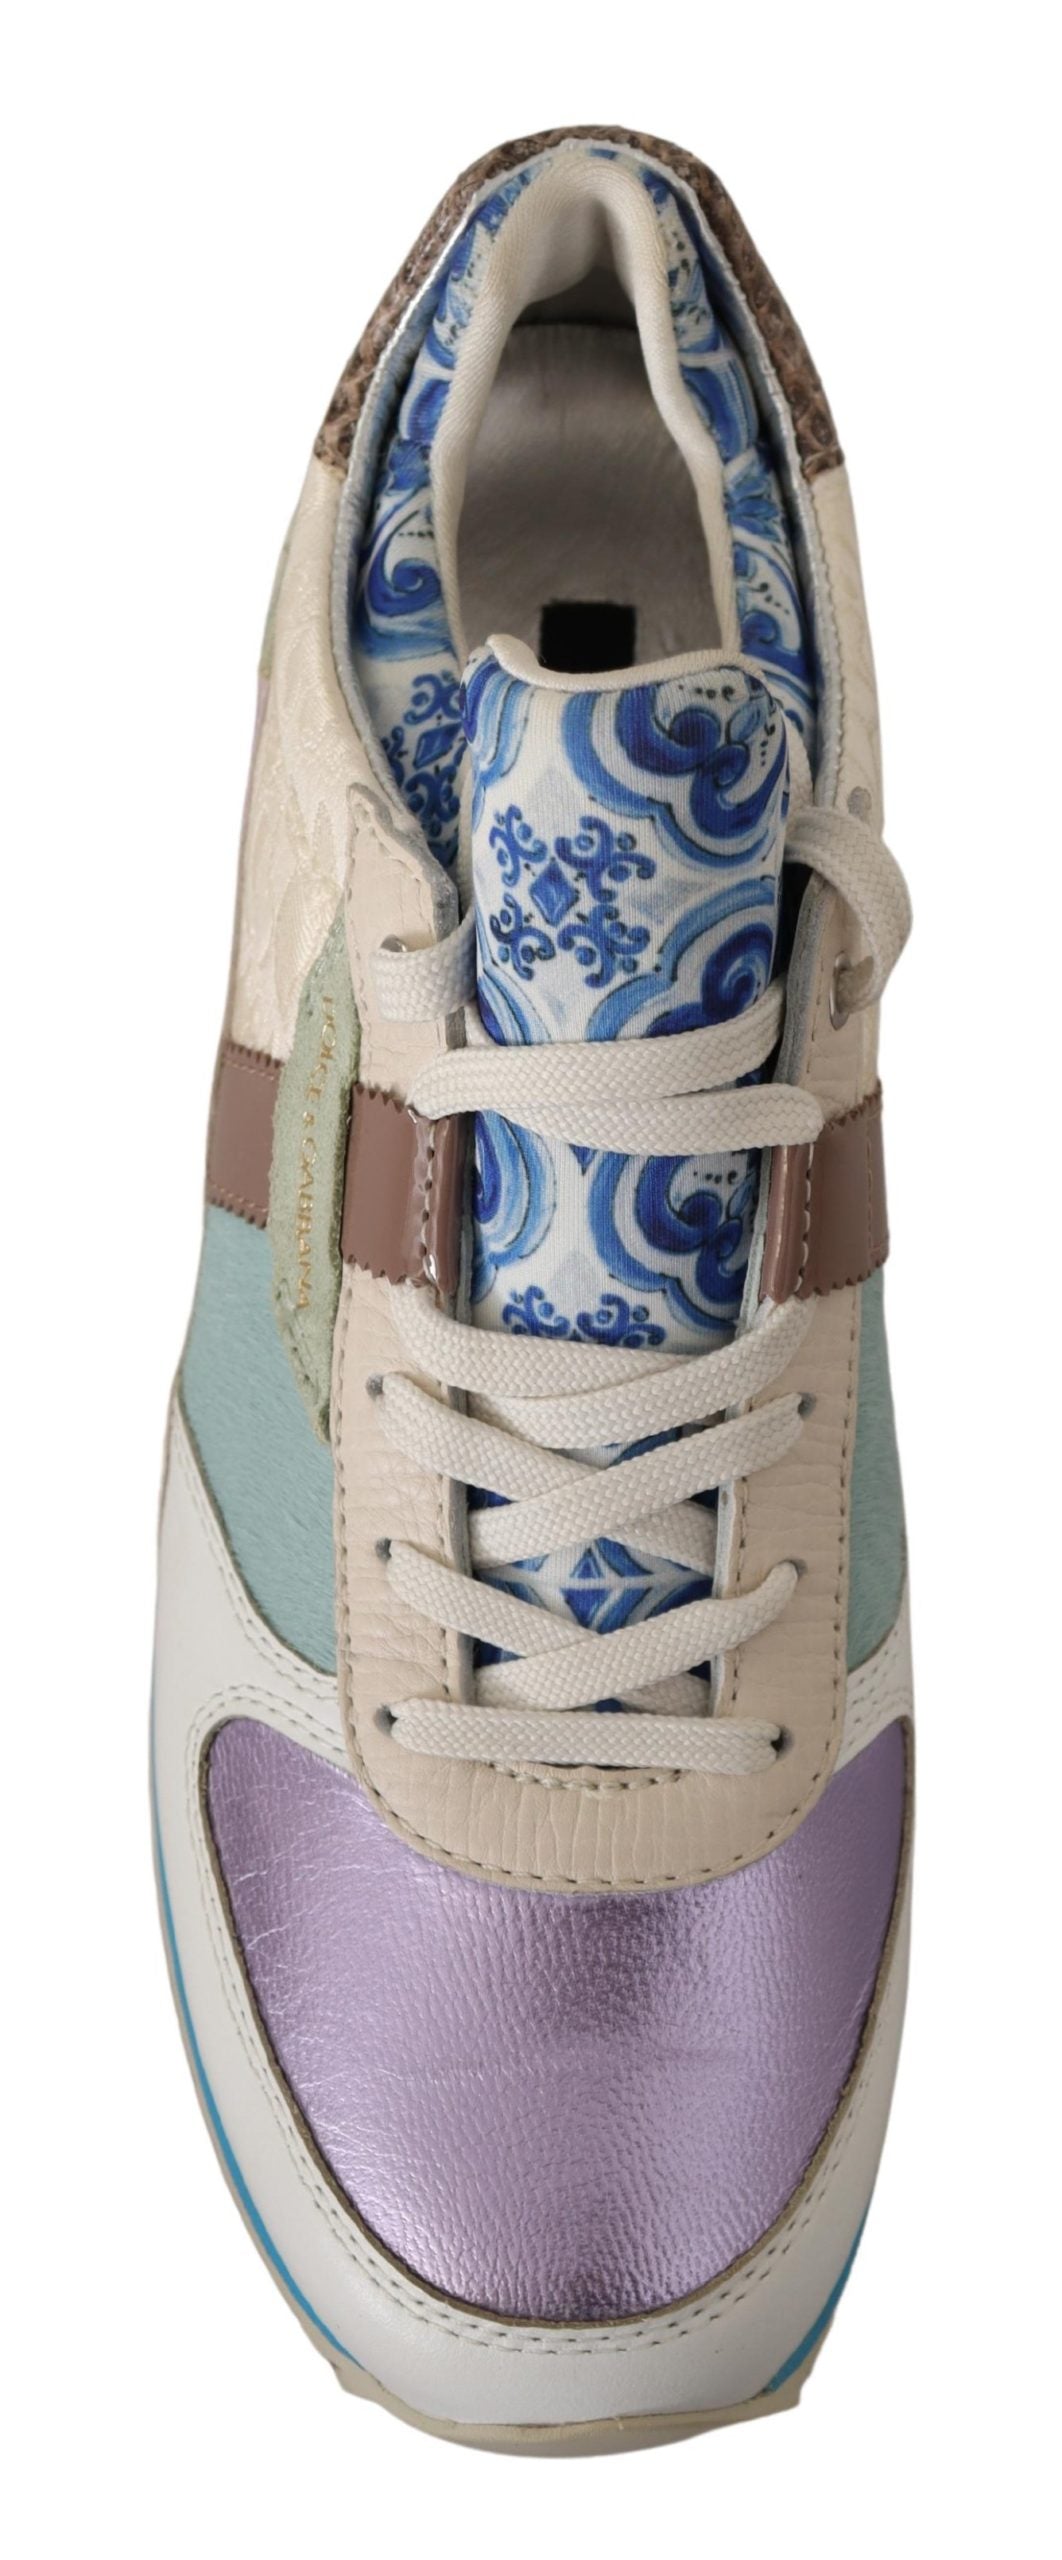 Dolce & Gabbana Multicolor Patchwork Lace Up Sneakers Shoes